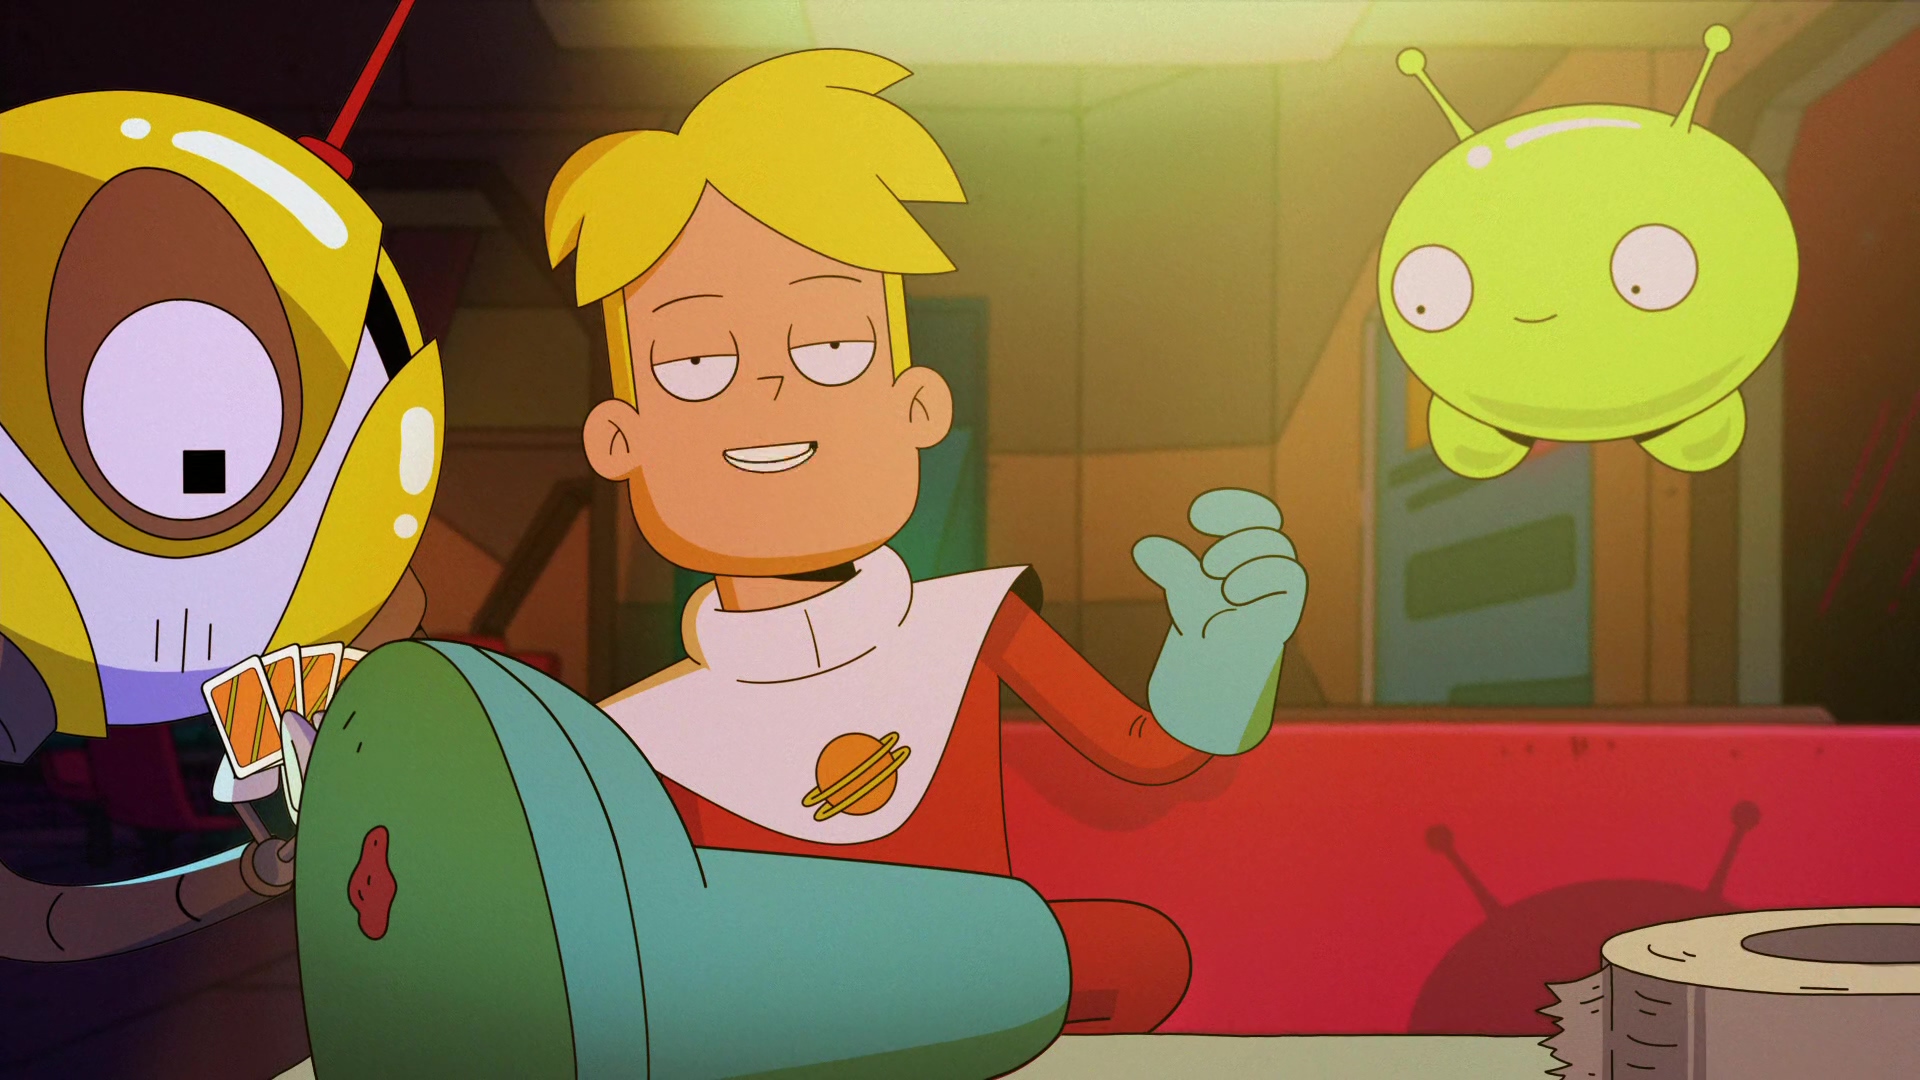 Final Space Wallpapers